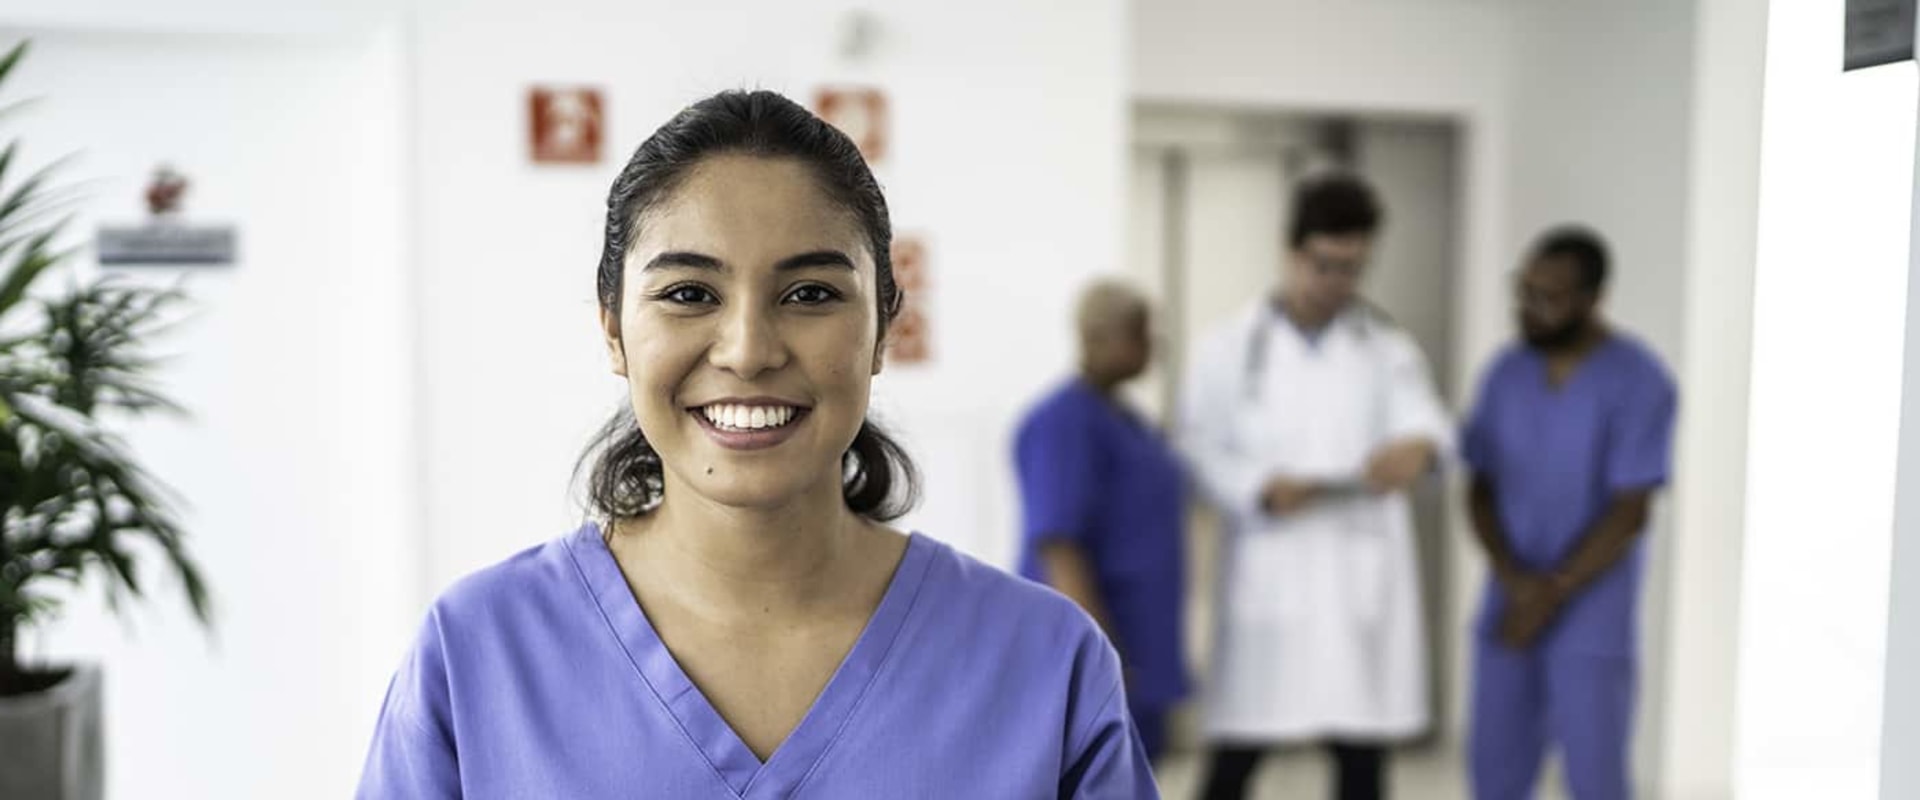 What Degrees Can You Earn in Medical School?